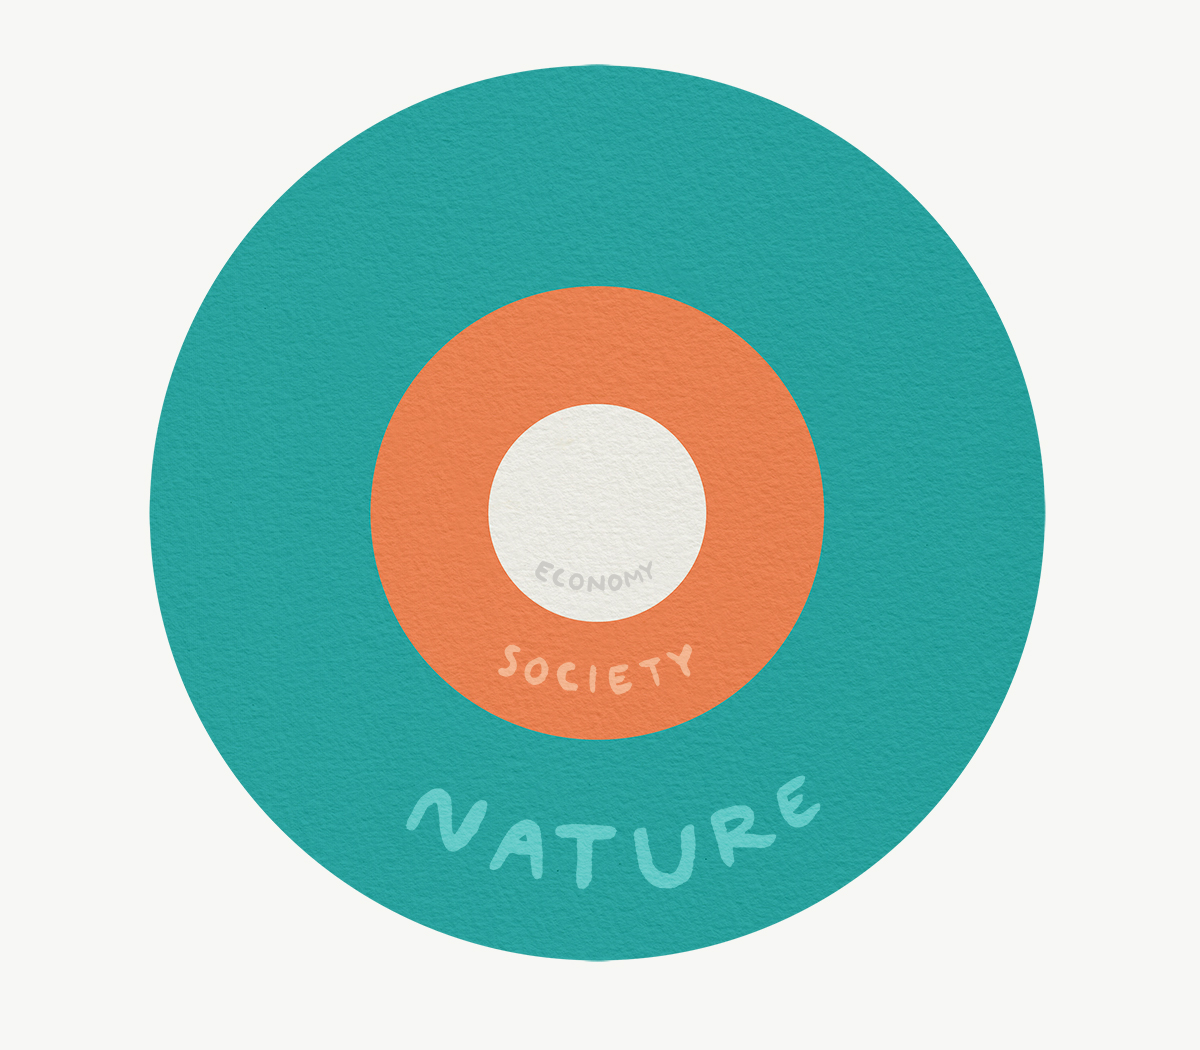 The social-ecological system: the economy is embedded in societal system; these are in turn supported by and must exist within nature. Illustration: E. Wikander/Azote